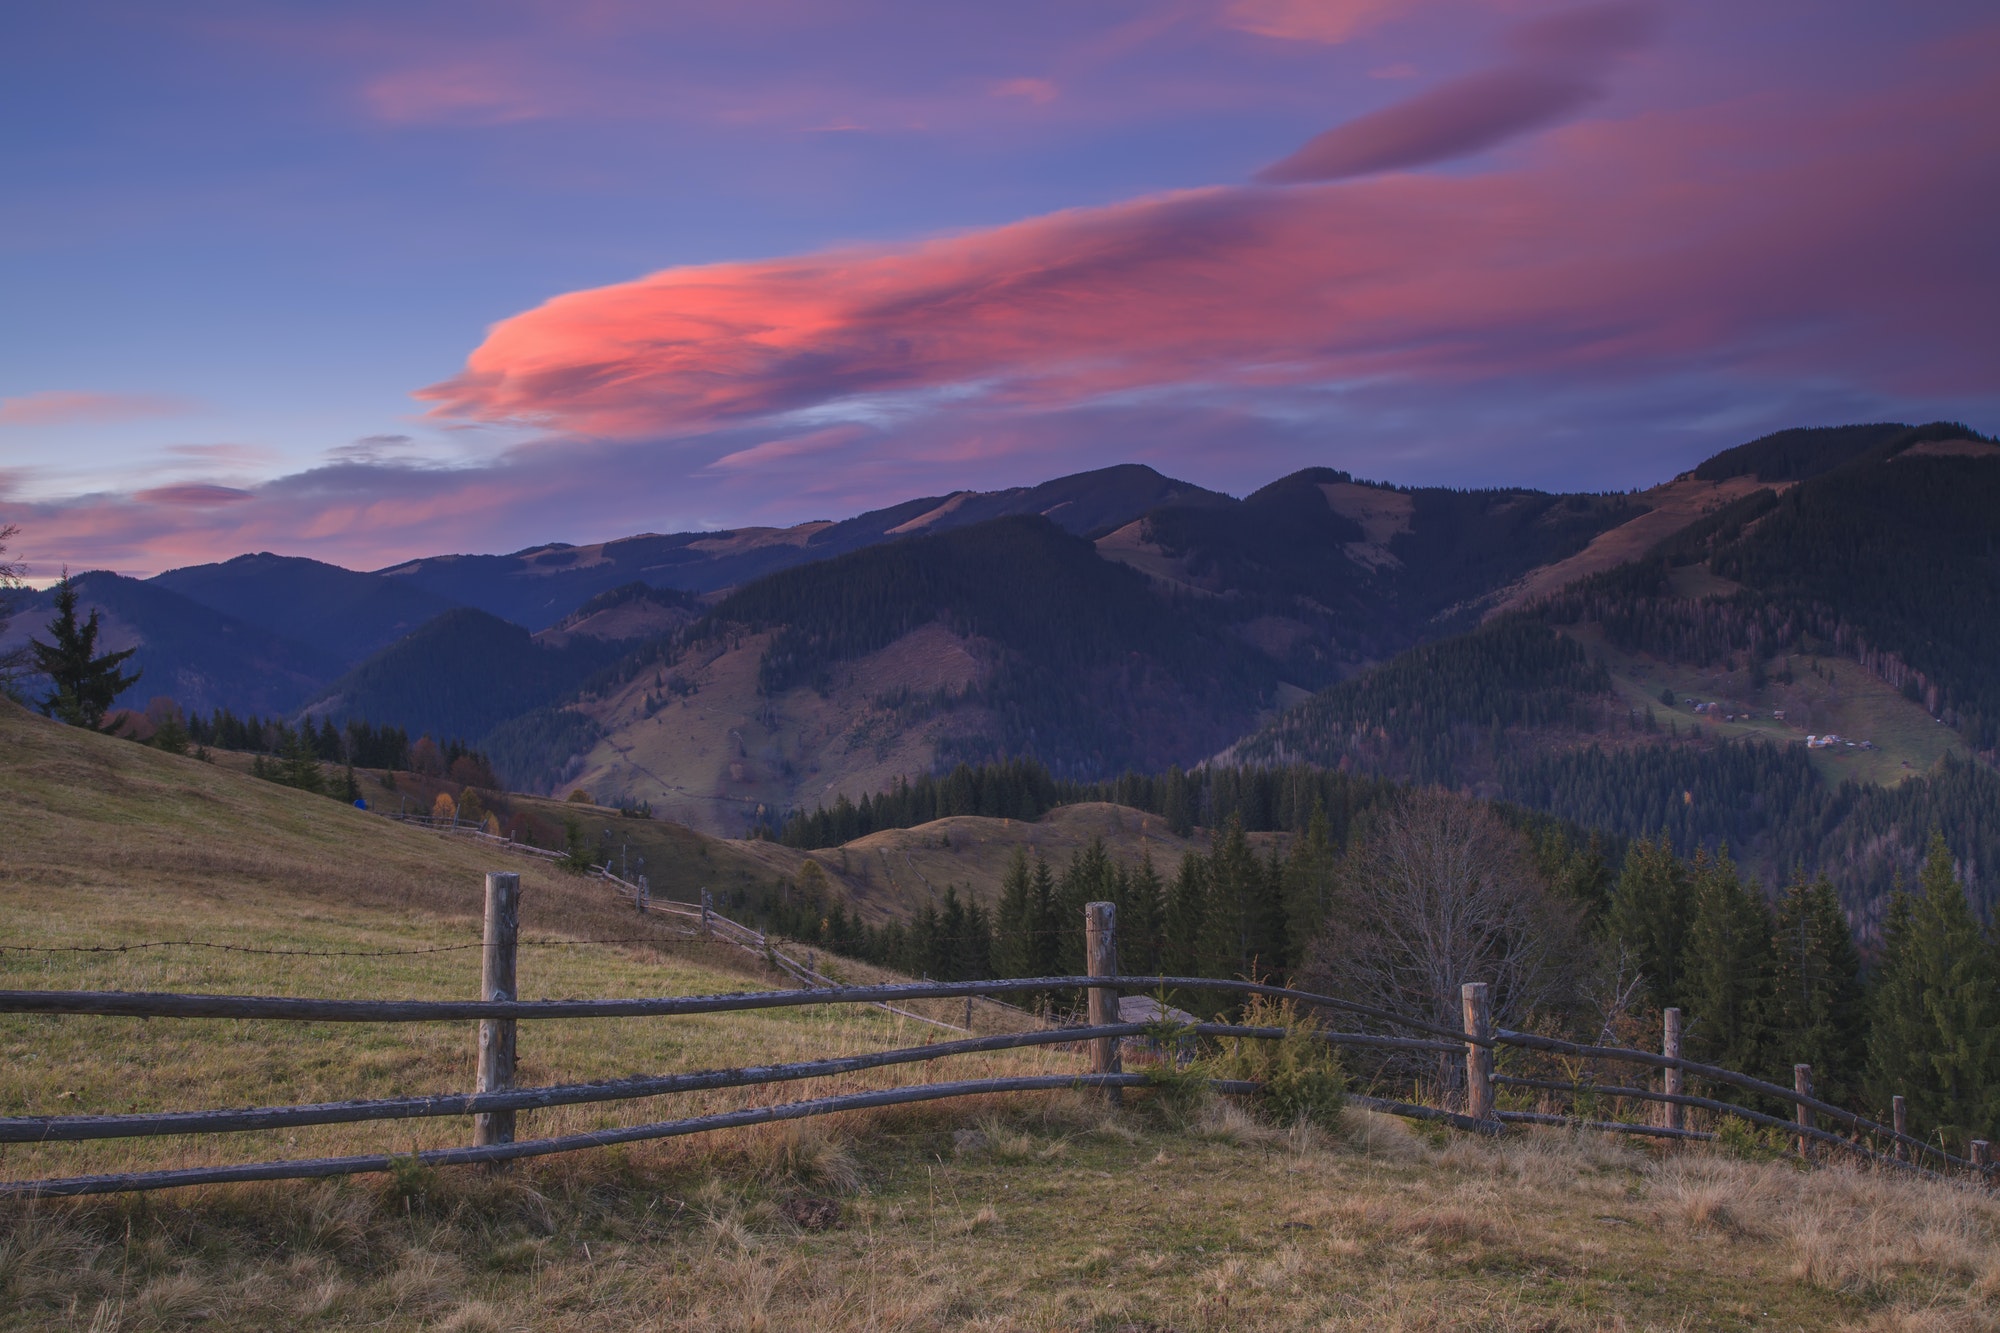 Beautiful sunset in the mountains on a slope with a fence